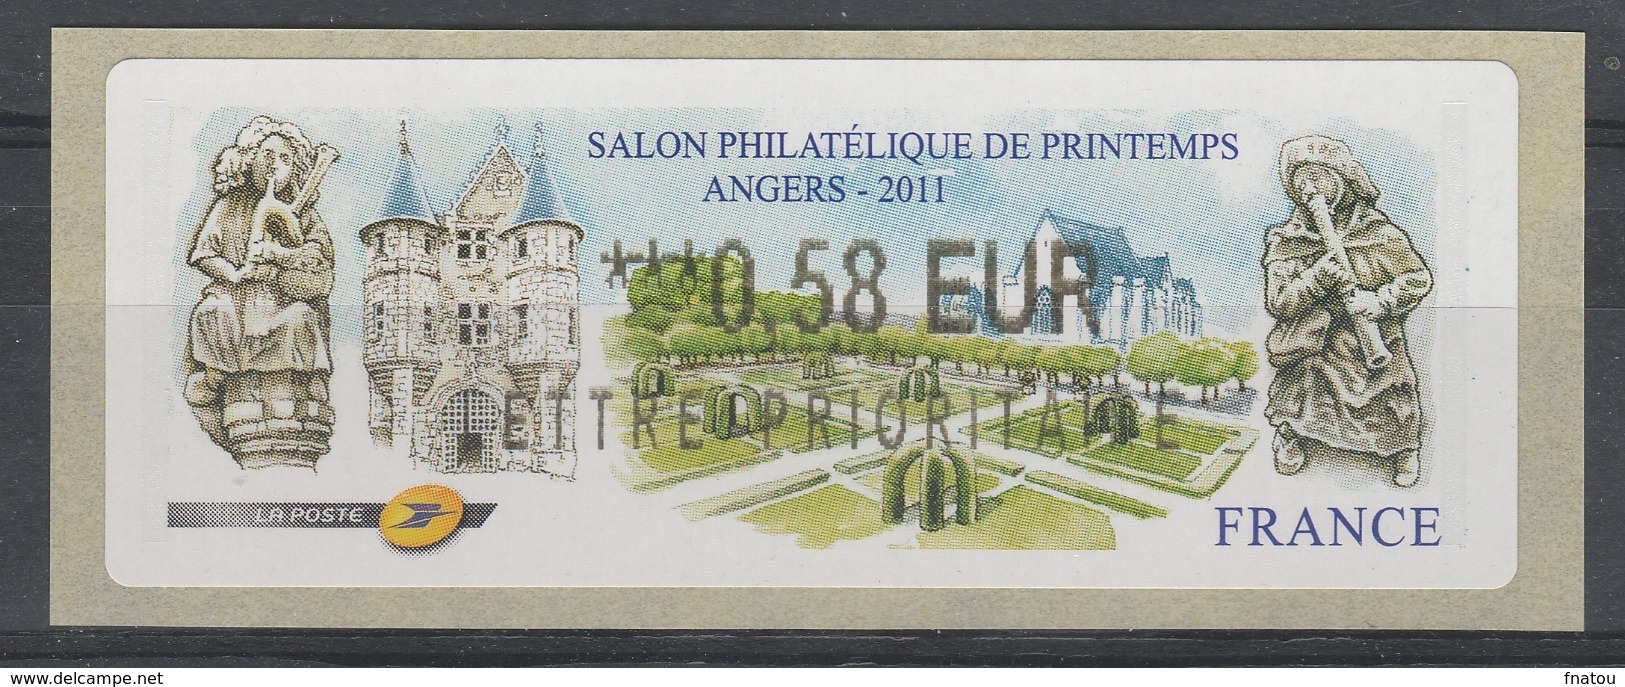 France, ATM Label, Philatelic Exhibition Angers, 2011, 0,58€, MNH VF - 2010-... Illustrated Franking Labels